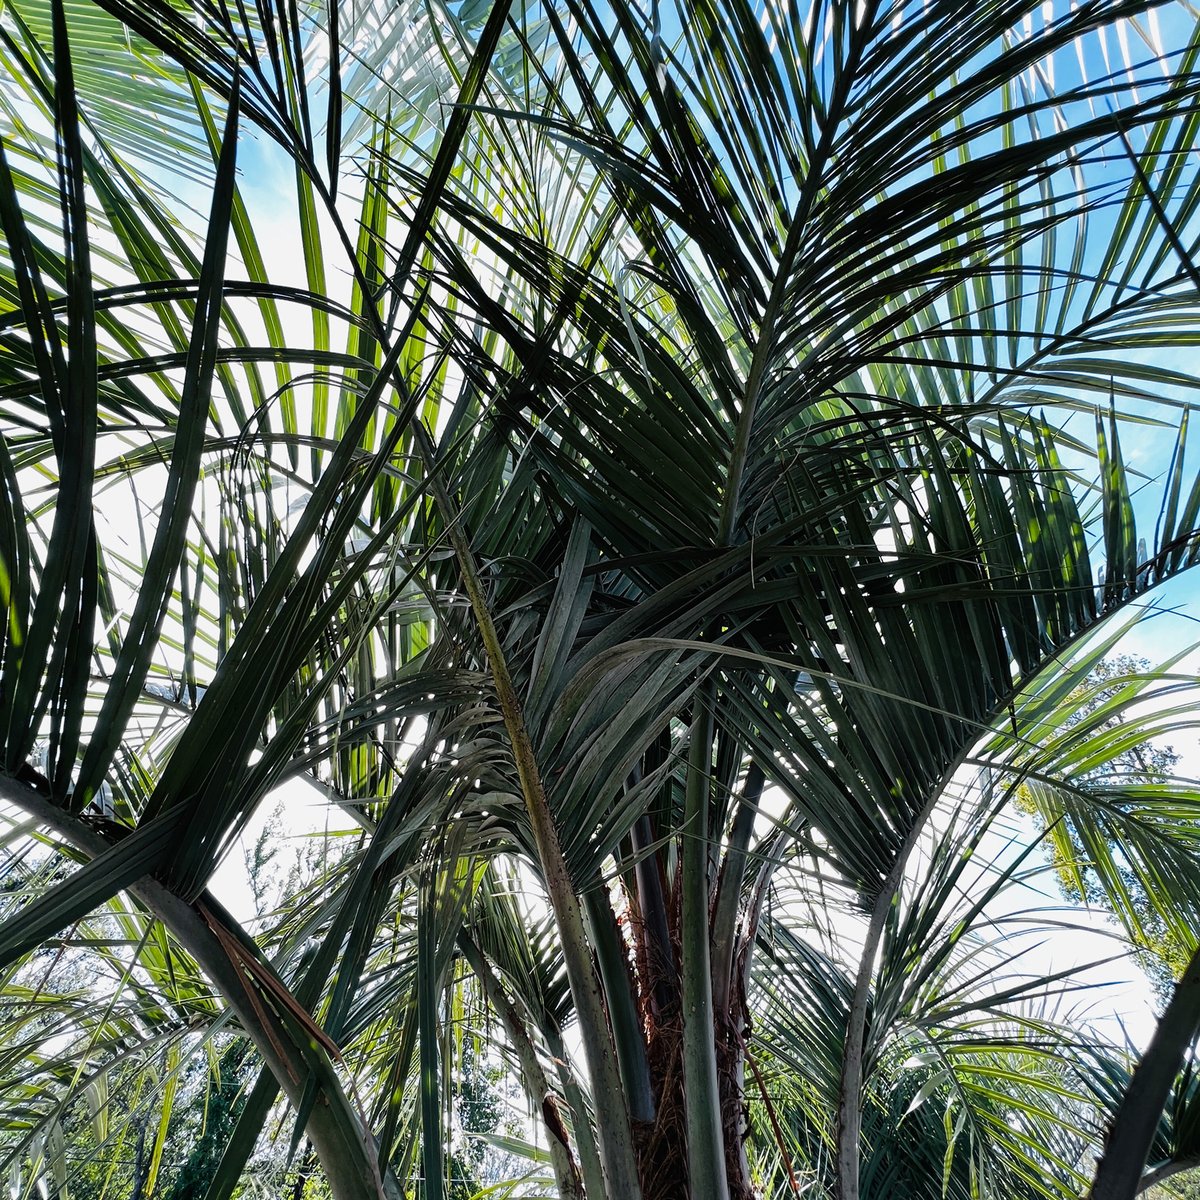 This weekend's warmth will have you dreaming about palm trees... Check out our selection at the Garden Center! Learn more: loom.ly/Yr_xyEU . . . #elmgrens #elmgrensservices #richmondhill #richmondhillgardencenter #hometowngardencenter #palmtrees #pindopalms #sagopalms